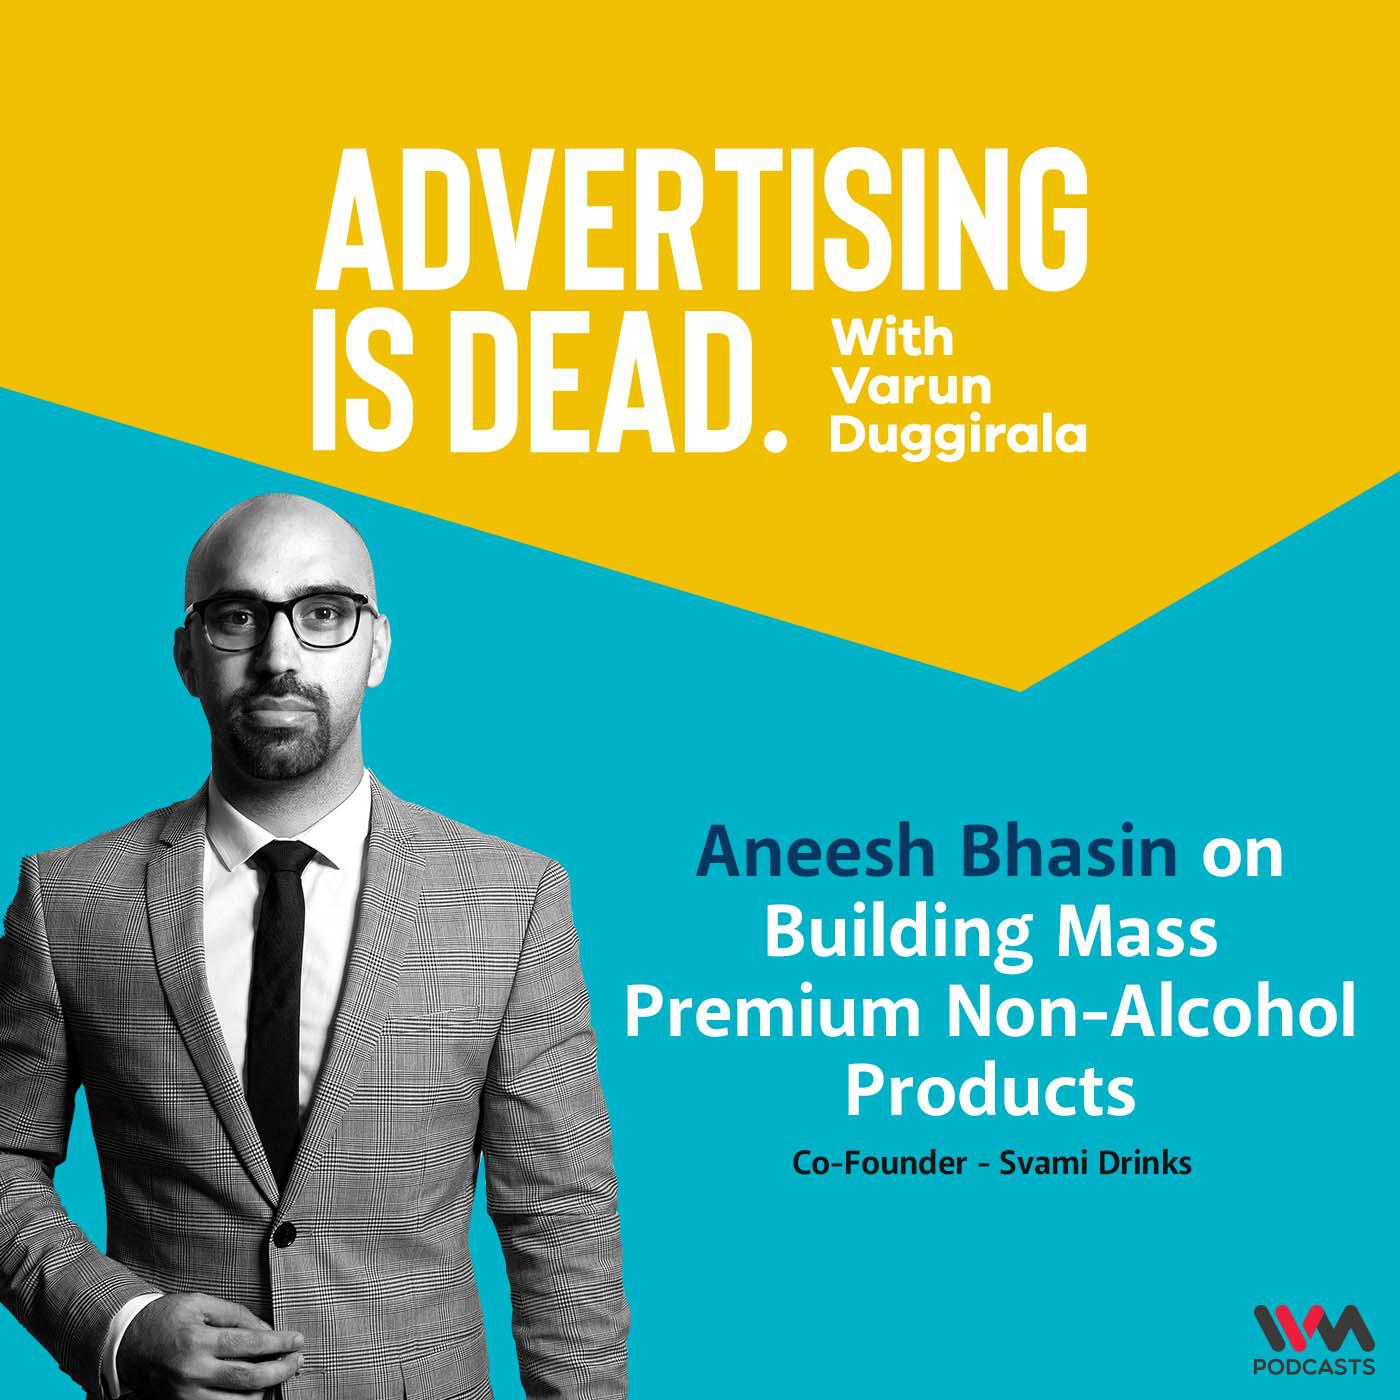 Aneesh Bhasin on Building Mass Premium Non-Alcohol Products